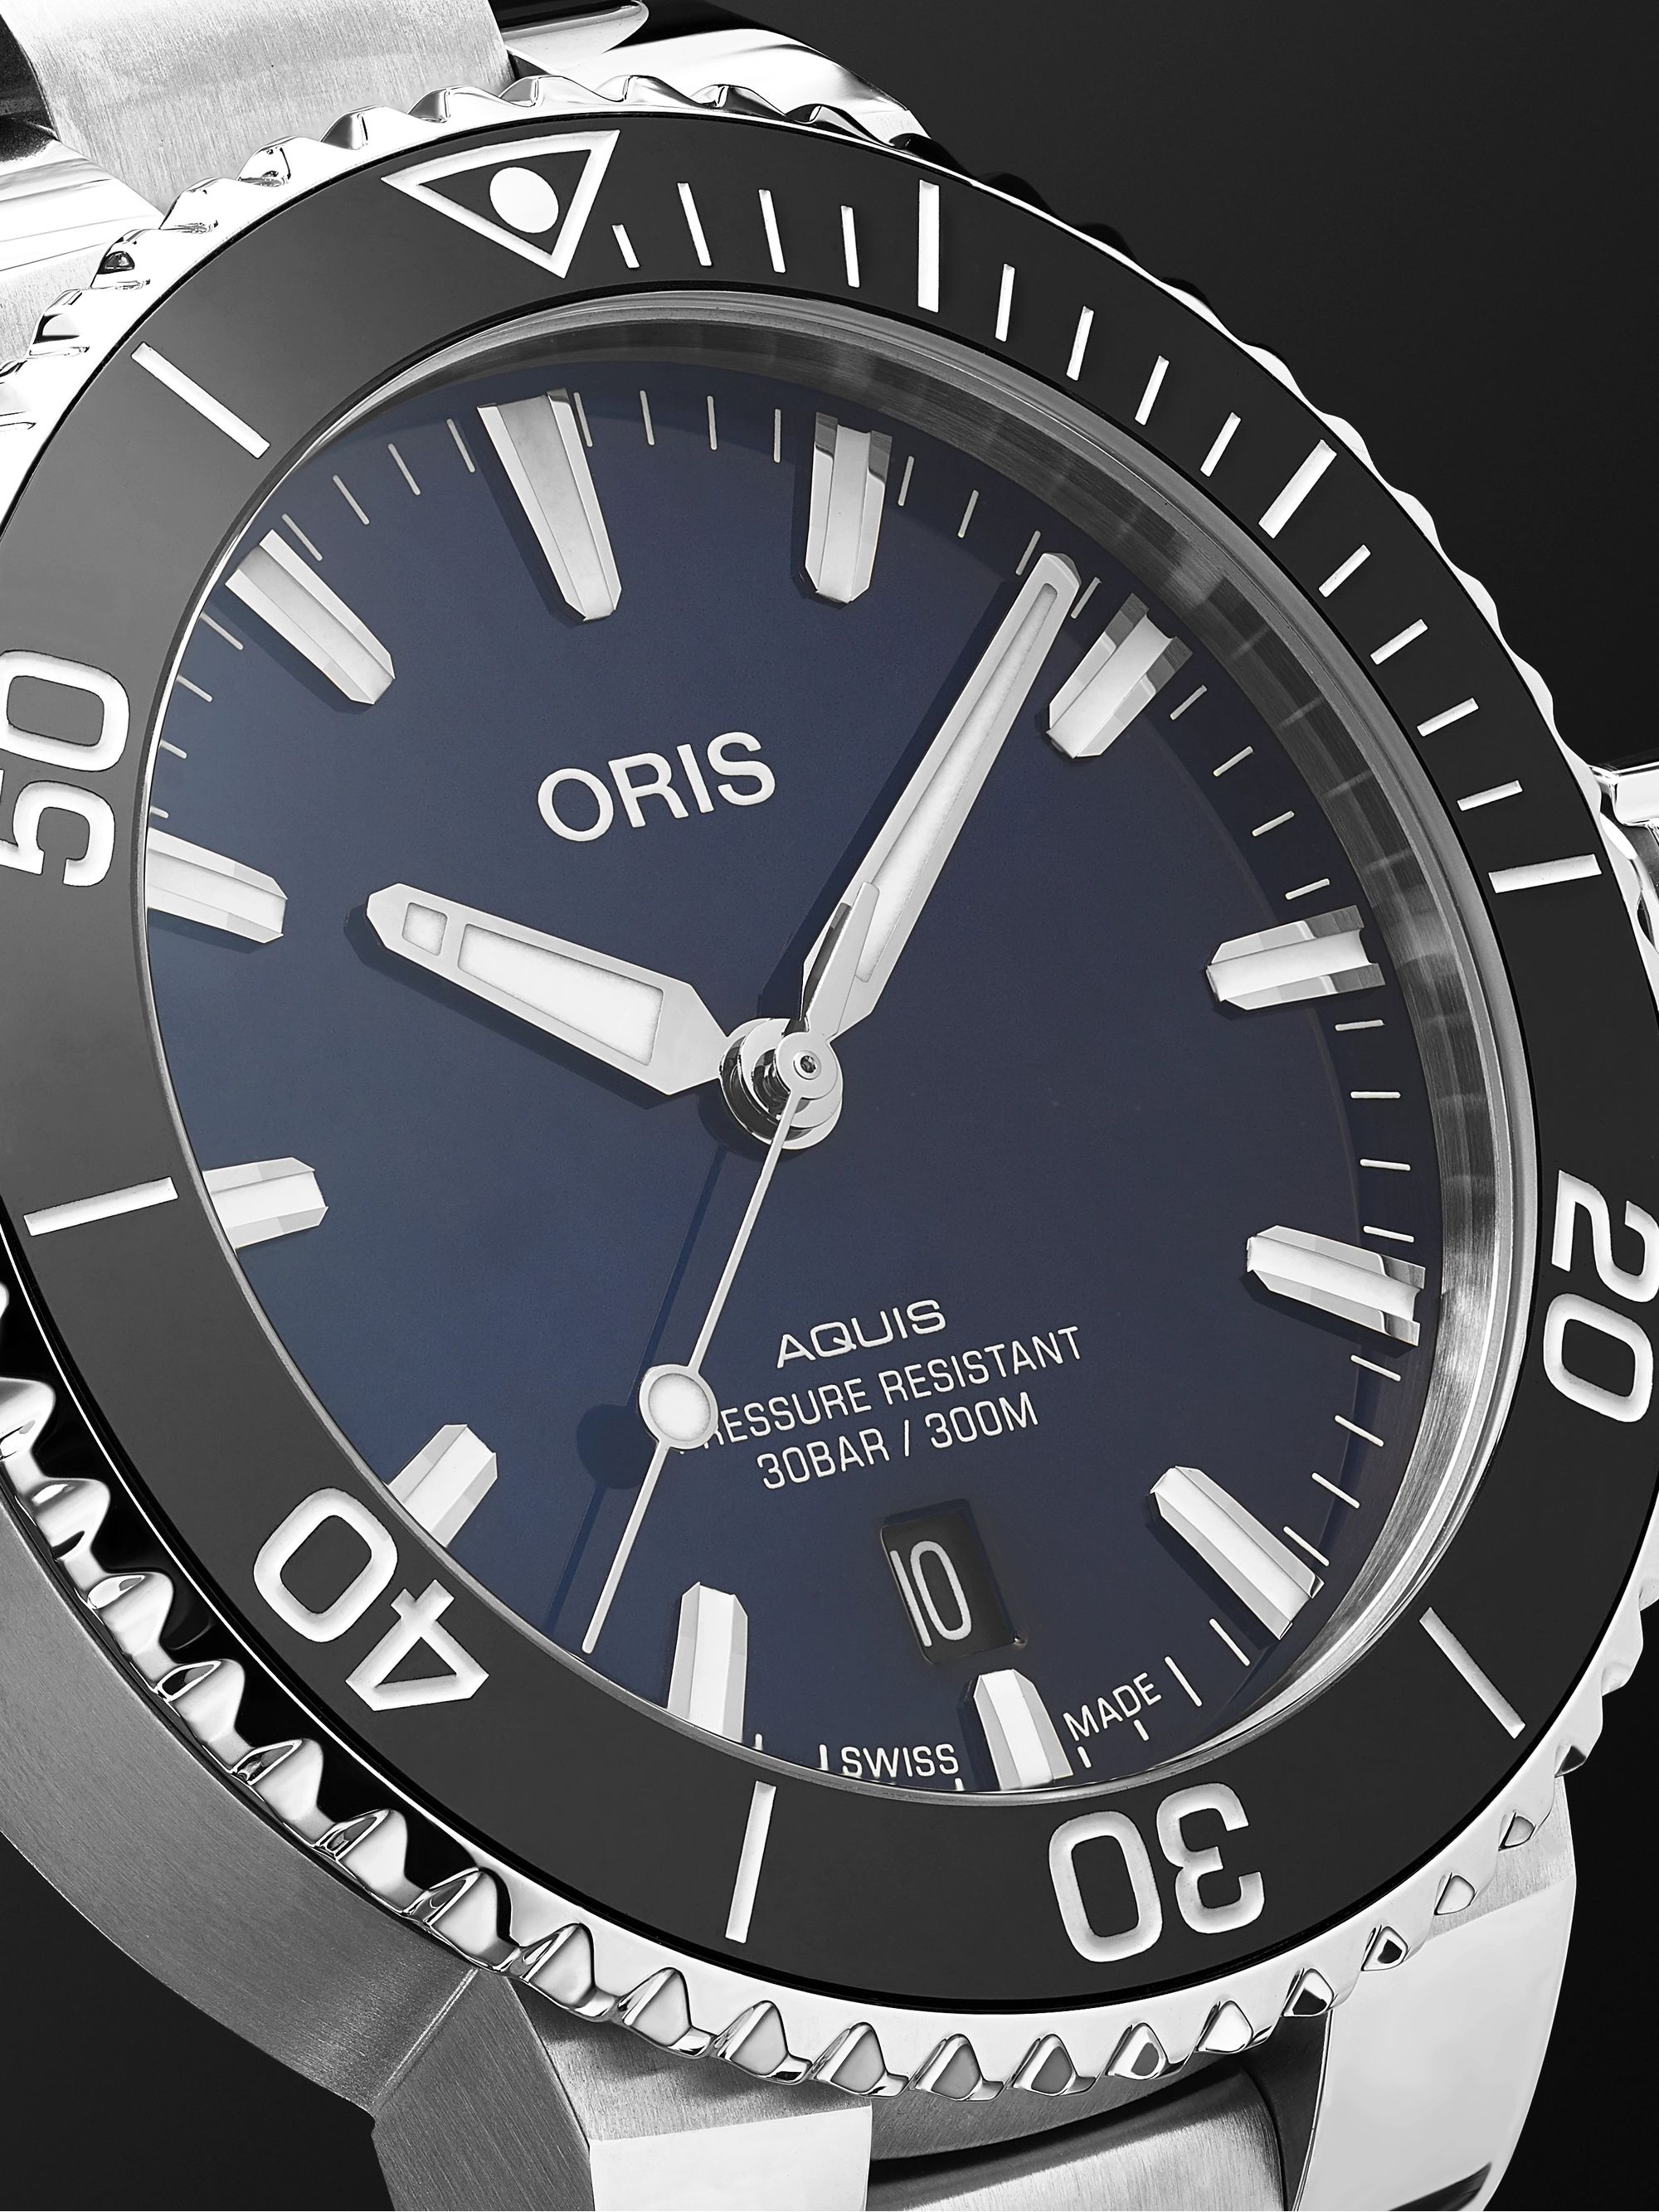 ORIS Aquis Date Automatic 41.5mm Stainless Steel Watch, Ref. No. 01 733 7766 4135-07 8 22 05PEB